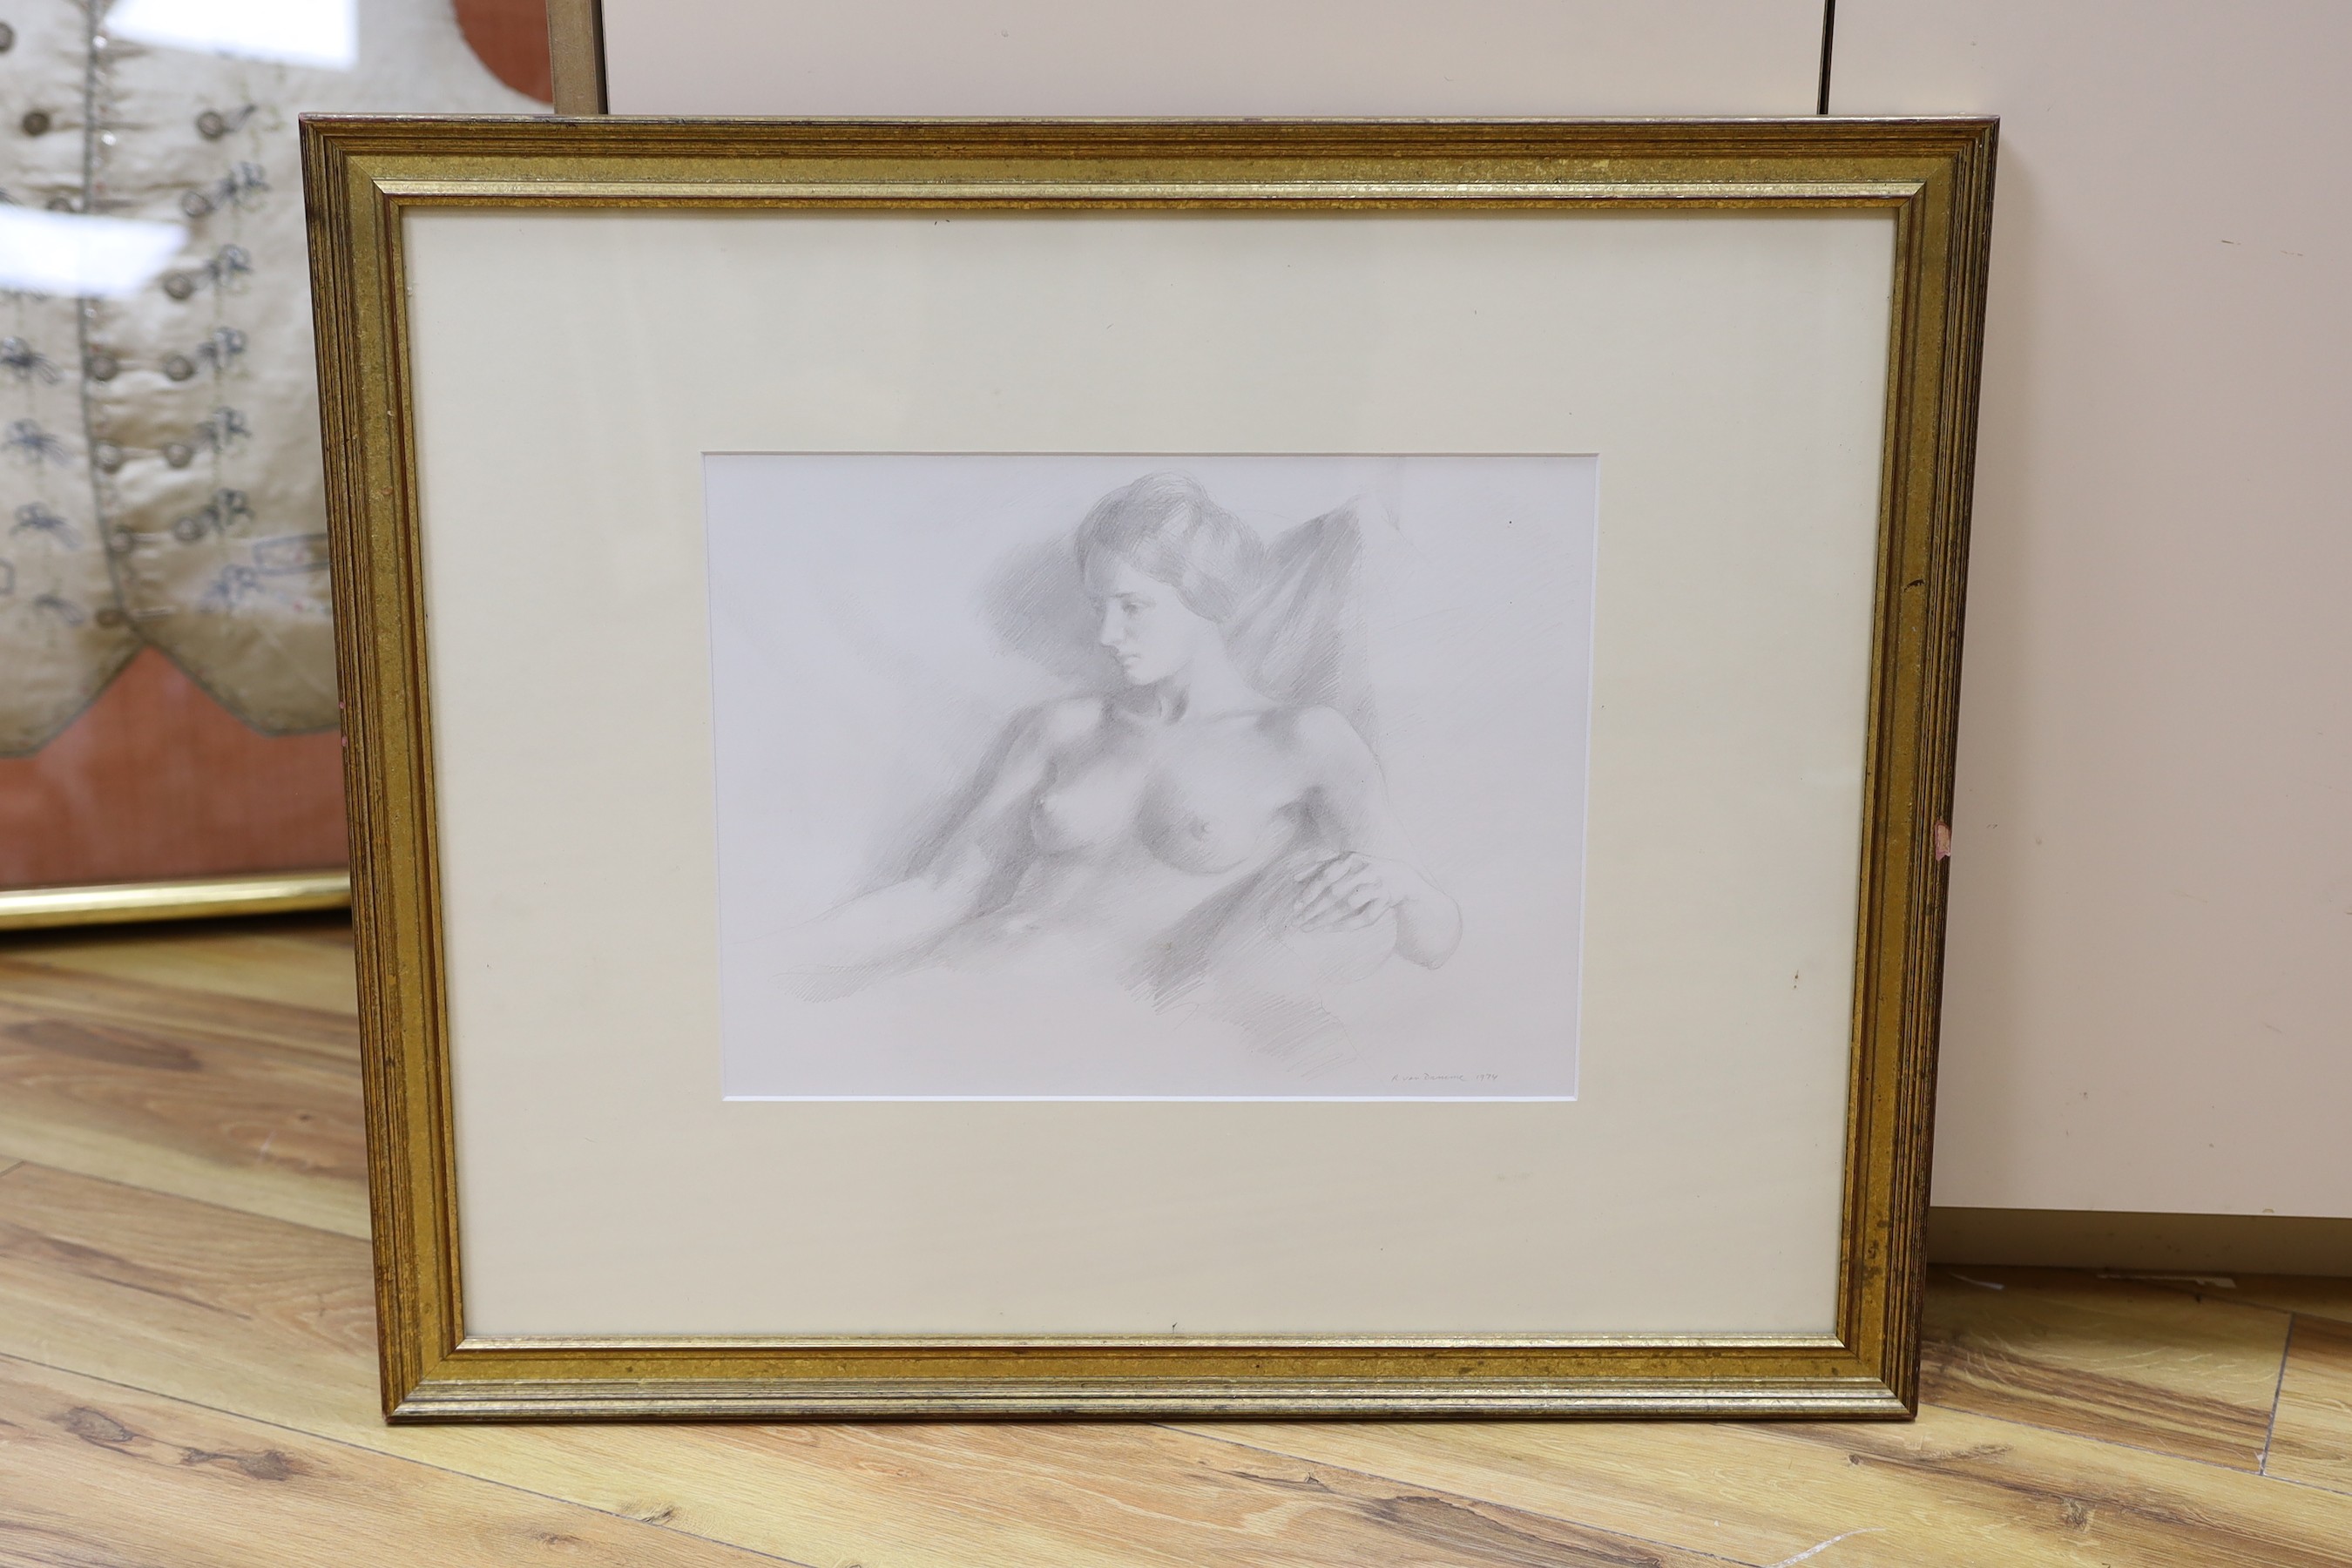 Roger Van Damme (1921-), pencil drawing, Female nude, signed and dated 1974, 28 x 37cm